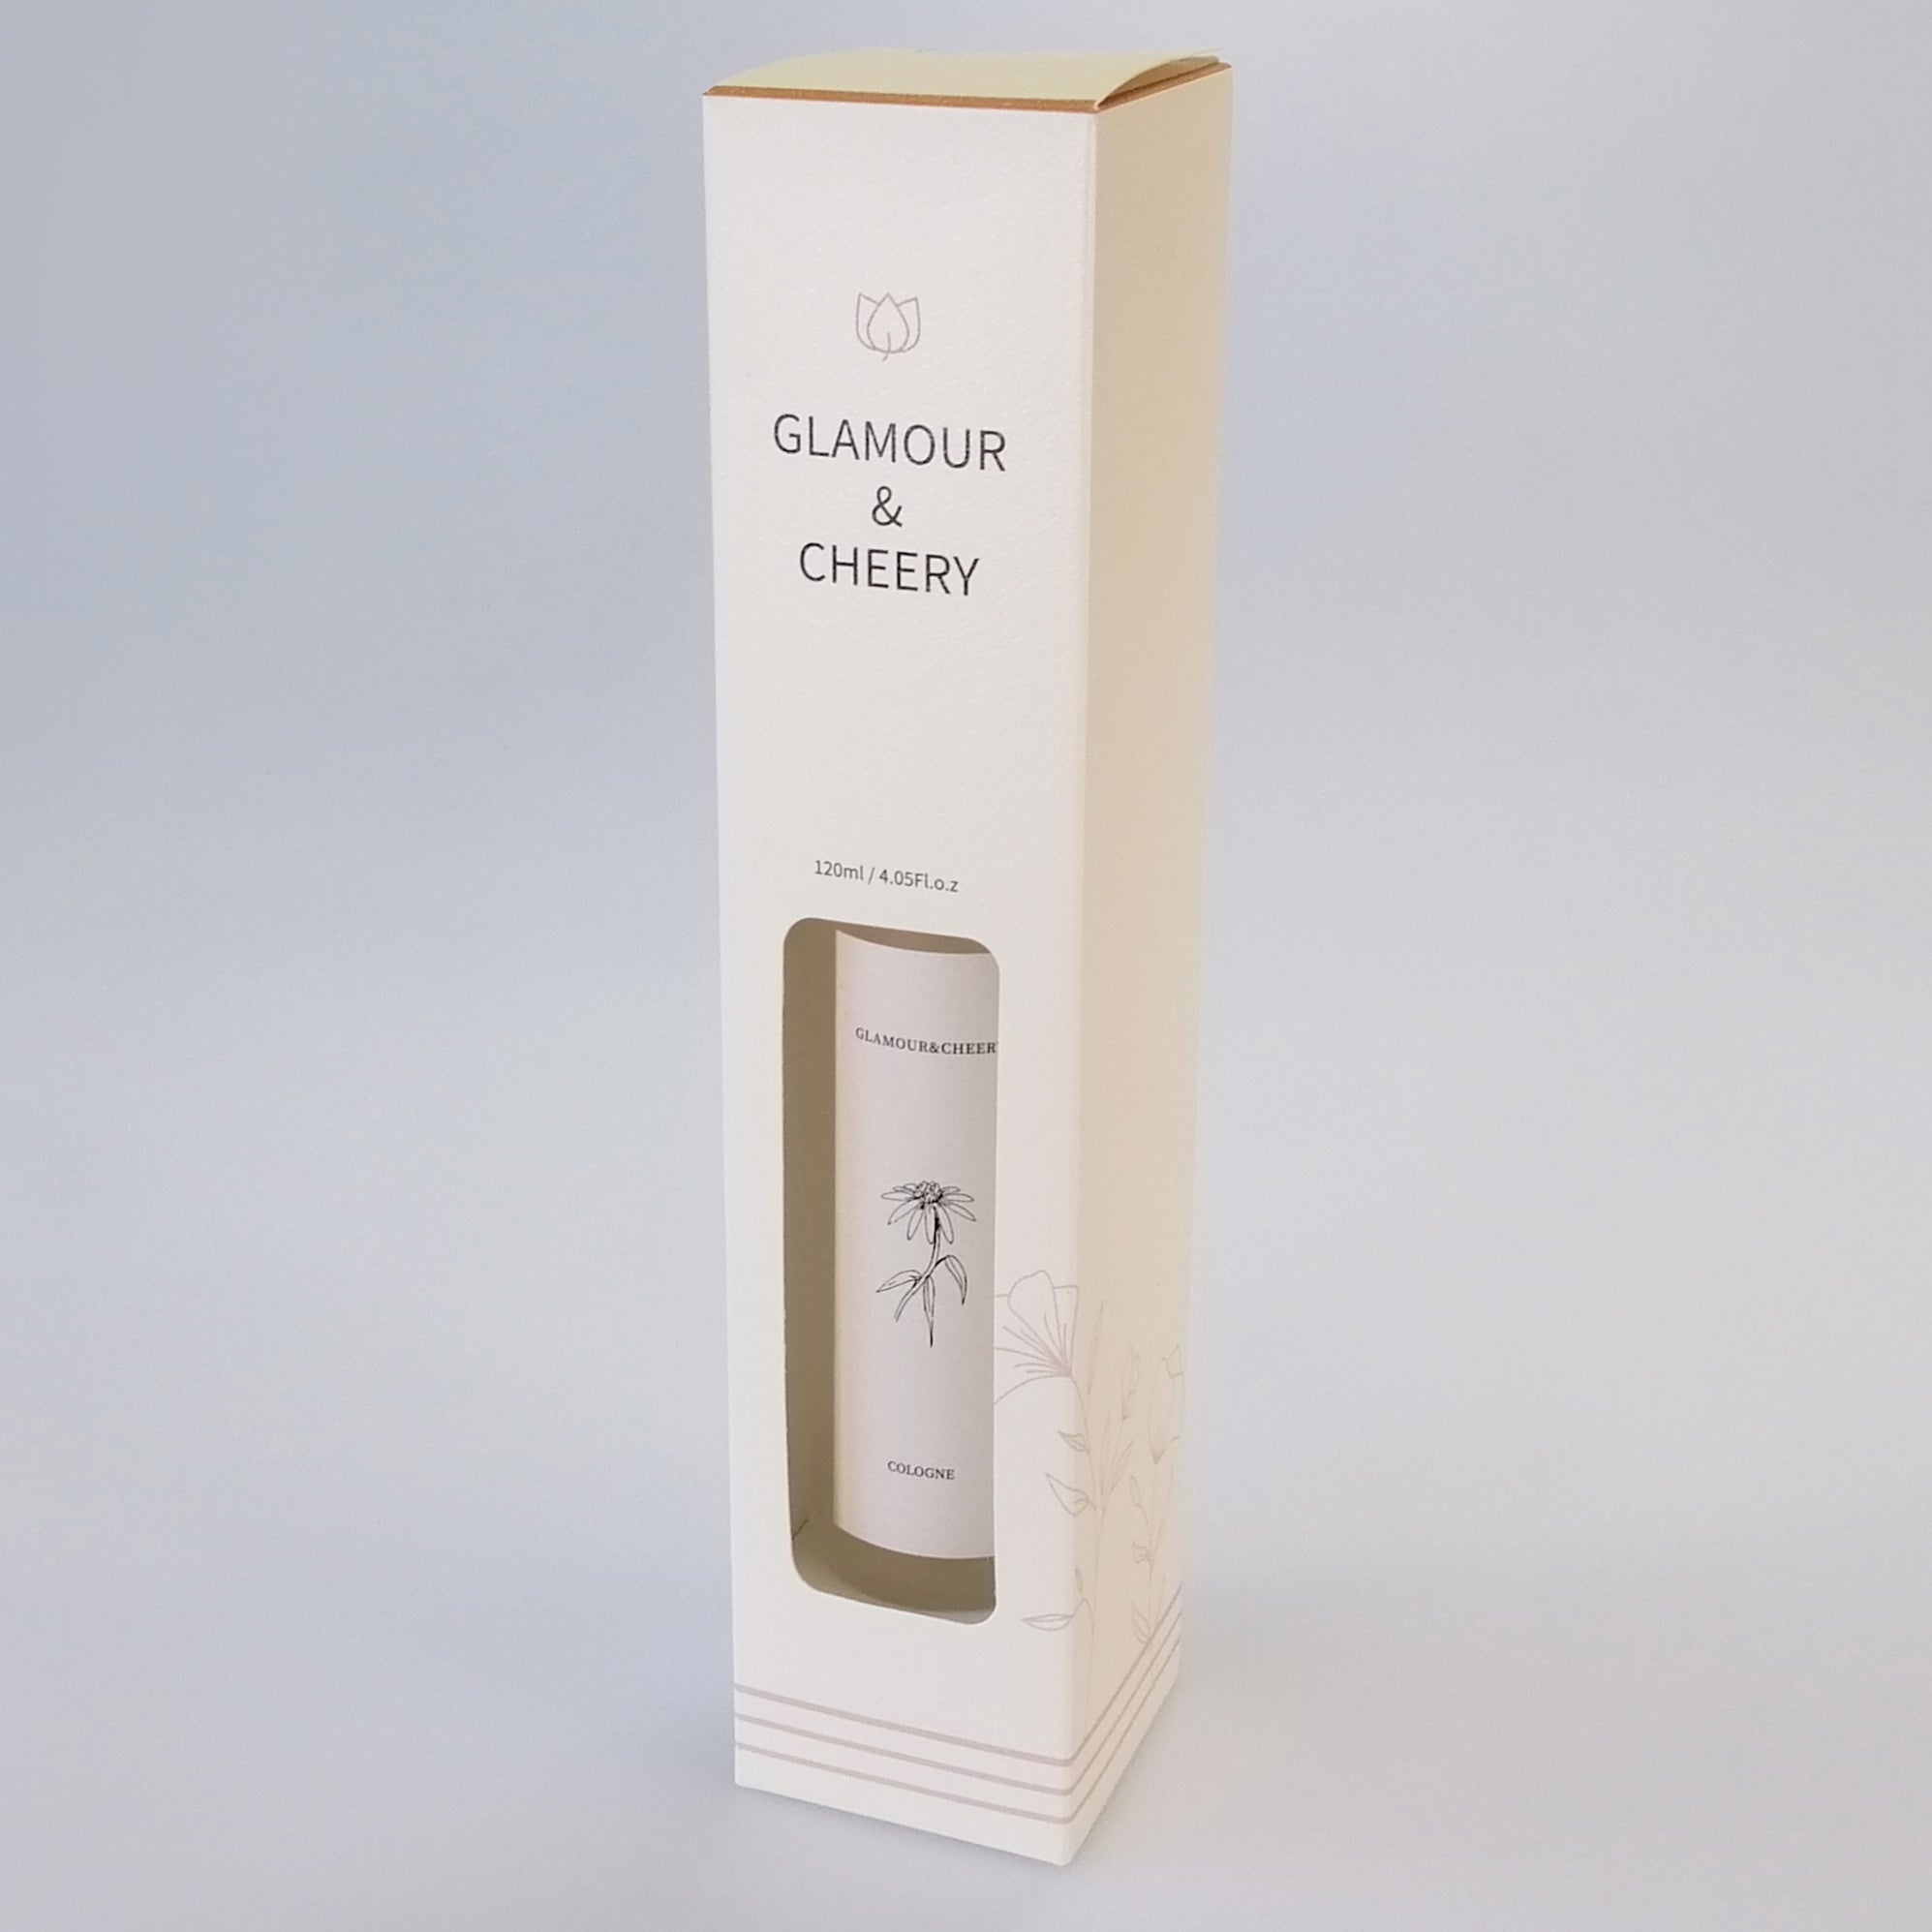 Glamour & Cheery Frosted Diffuser - Cologne - 120ml